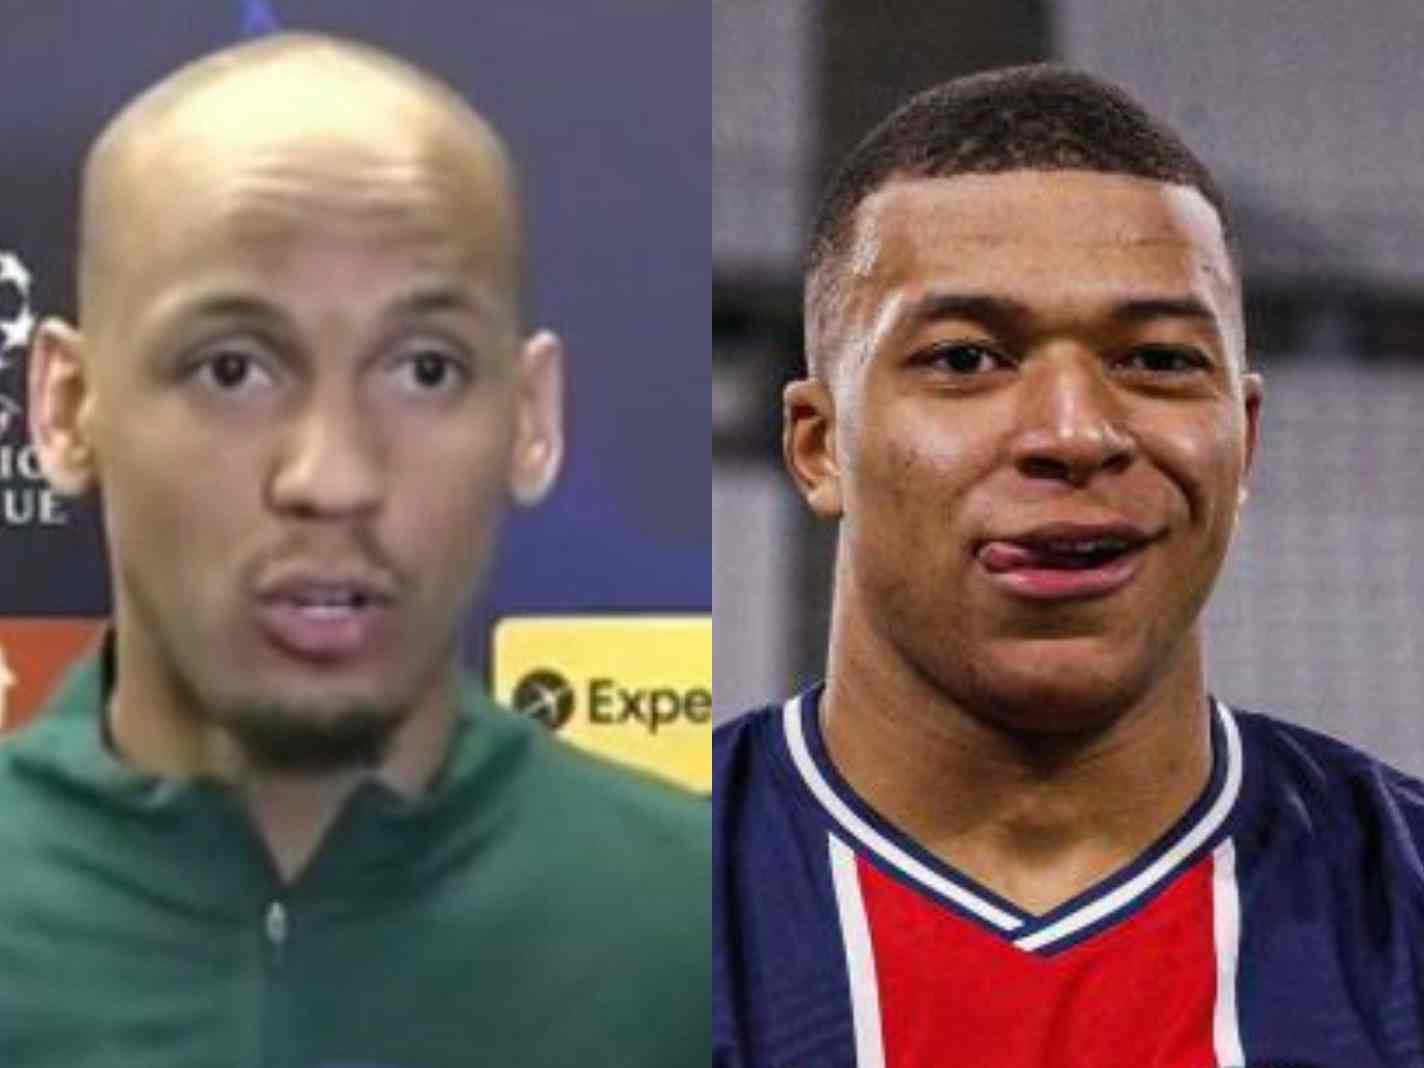 A two photo collage featuring Fabinho and Kylian Mbappe